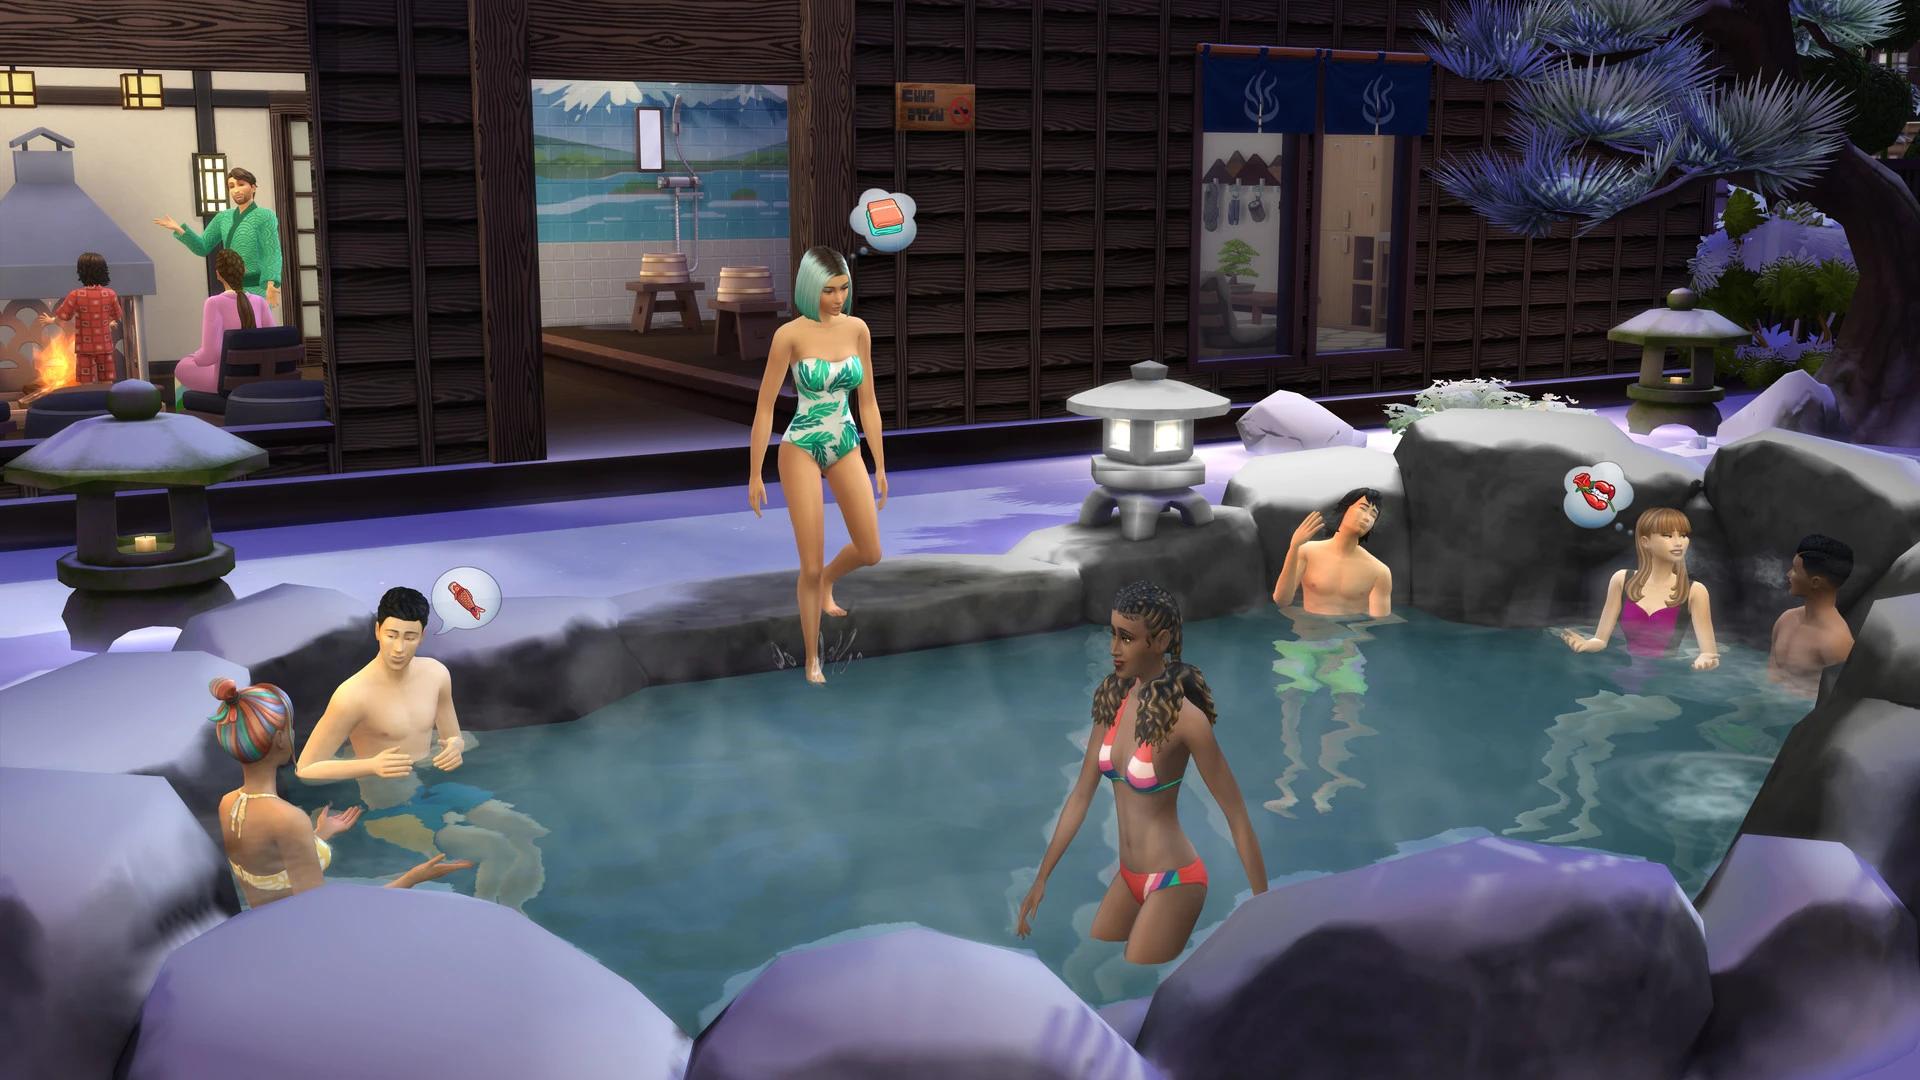 https://media.imgcdn.org/repo/2023/05/the-sims-4-snowy-escape-expansion-pack/646f2f1c7bff0-the-sims-4-snowy-escape-expansion-pack-screenshot4.webp